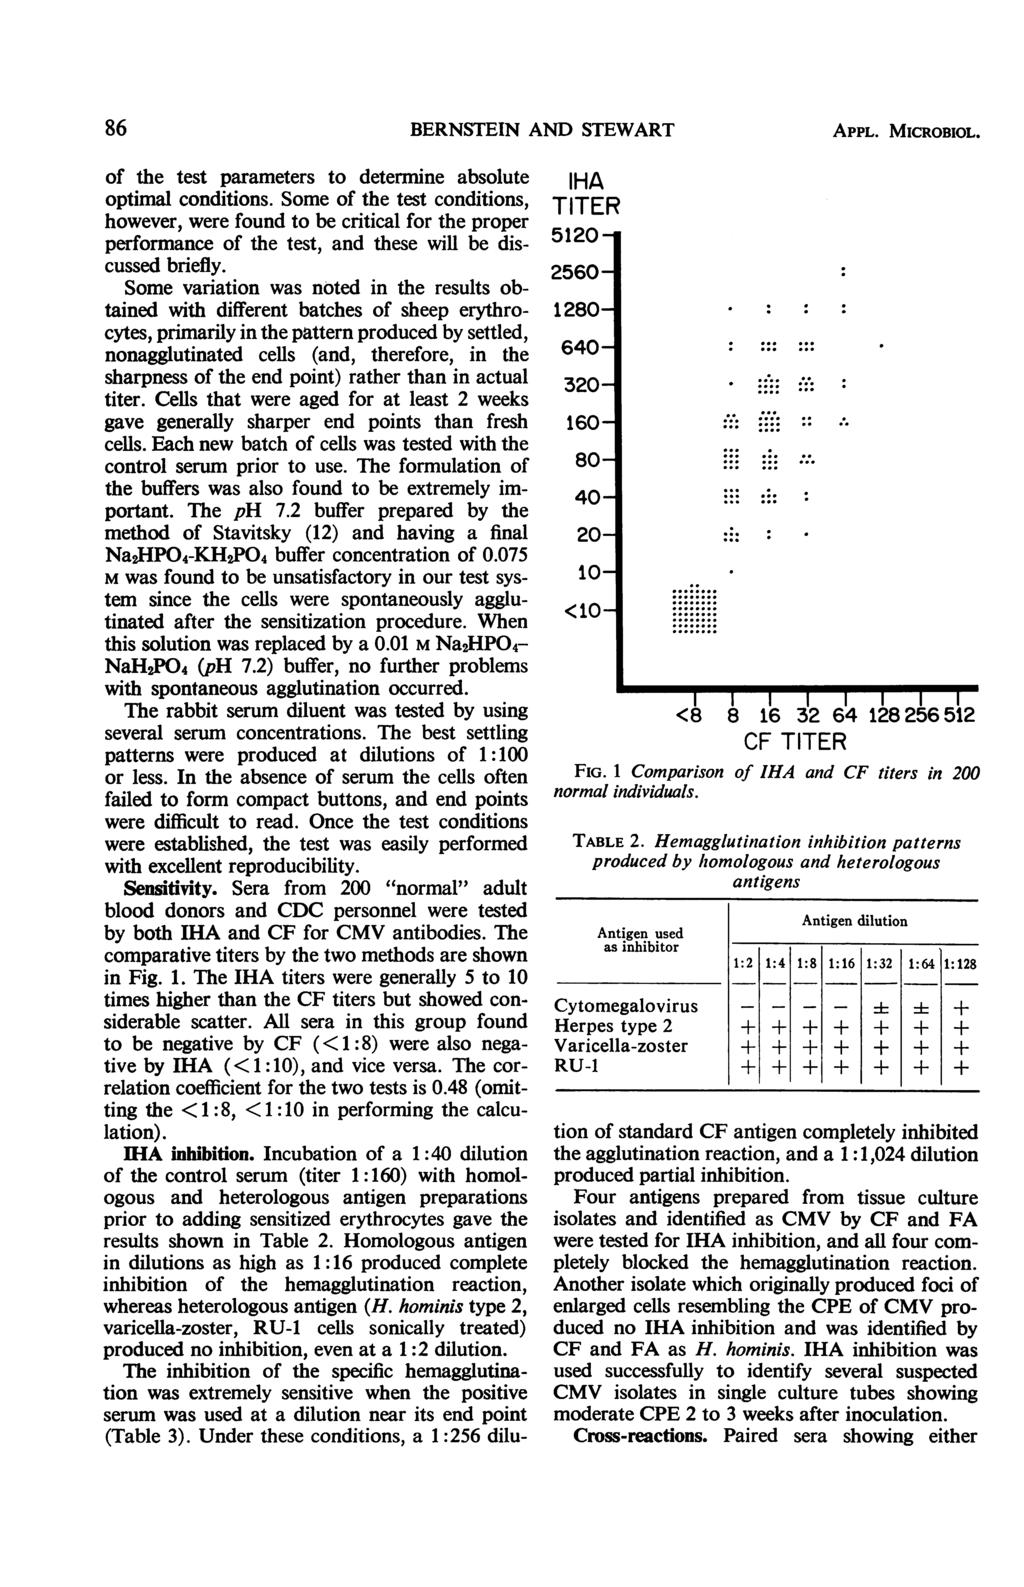 86 BERNSTEIN AND STEWART APPL. MICROBIOL. of the test parameters to determine absolute optimal conditions.